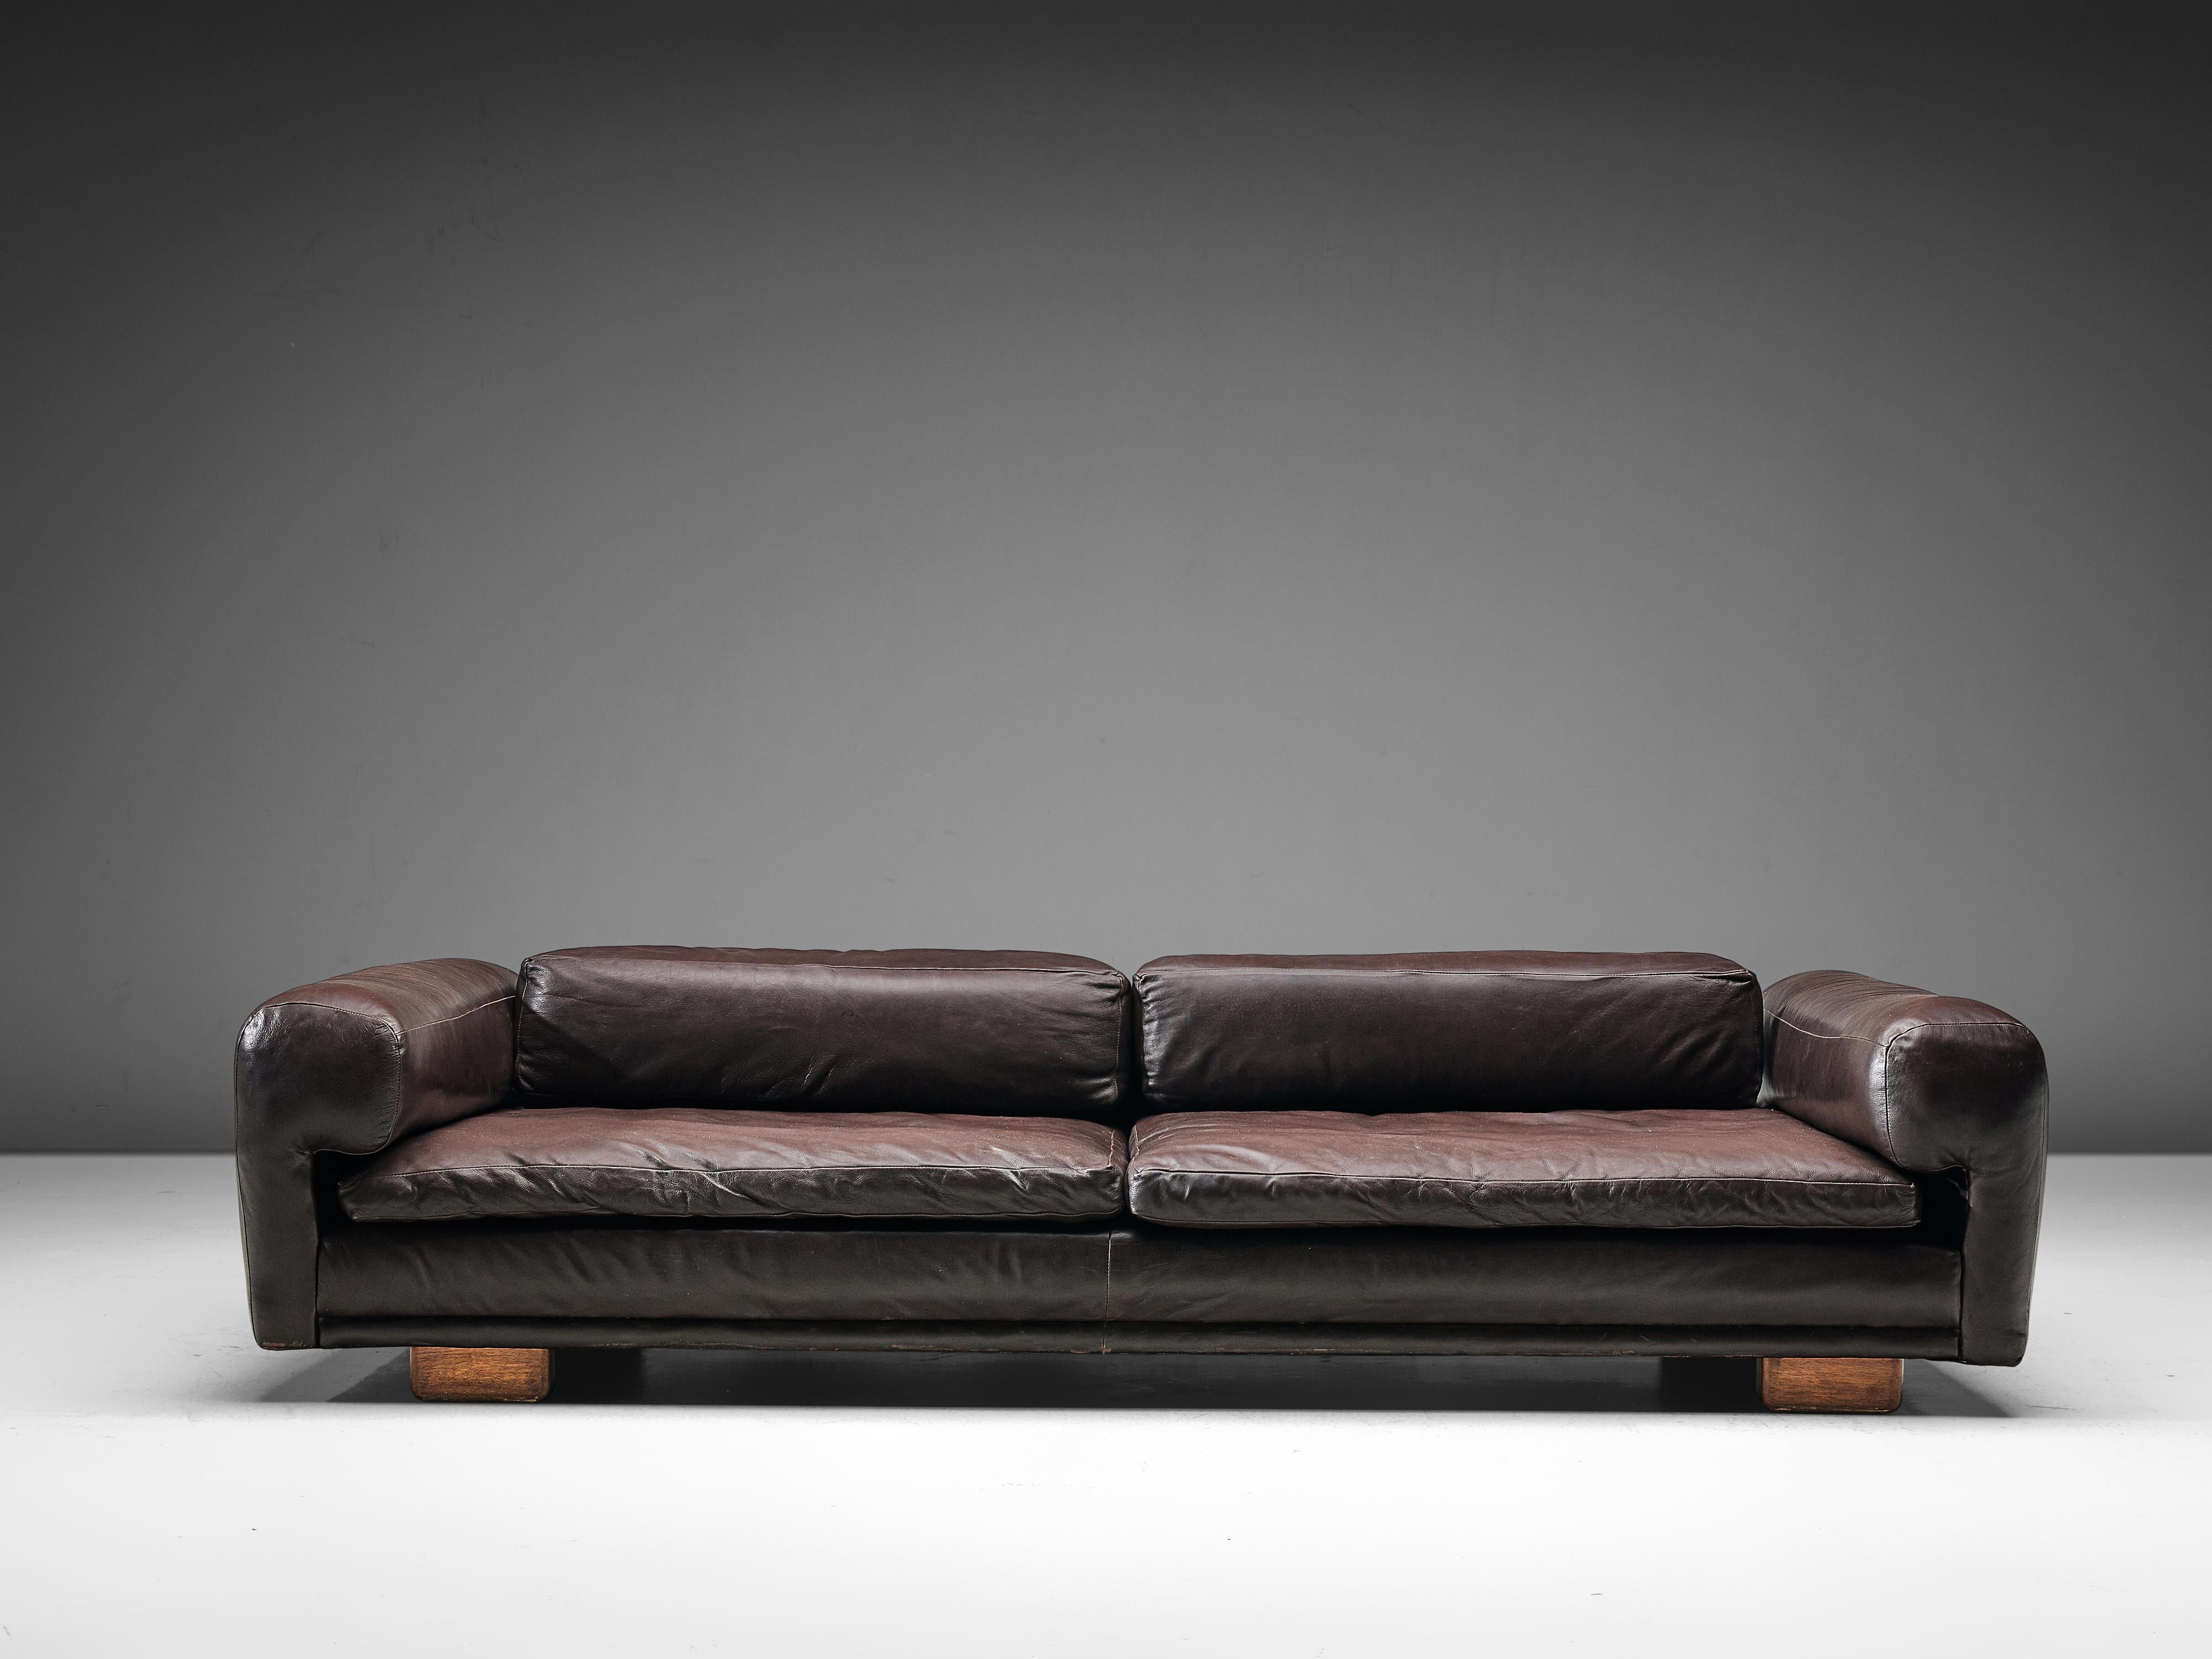 Howard Keith, 'Diplomat' sofa, black leather, wood, United Kingdom, 1970s.

Grand voluptuous sofa by Howard Keith for HK Furniture, designed in the 1970s. This sofa with a deep seat is a true delight to sit and relax in. The thick armrests, seat